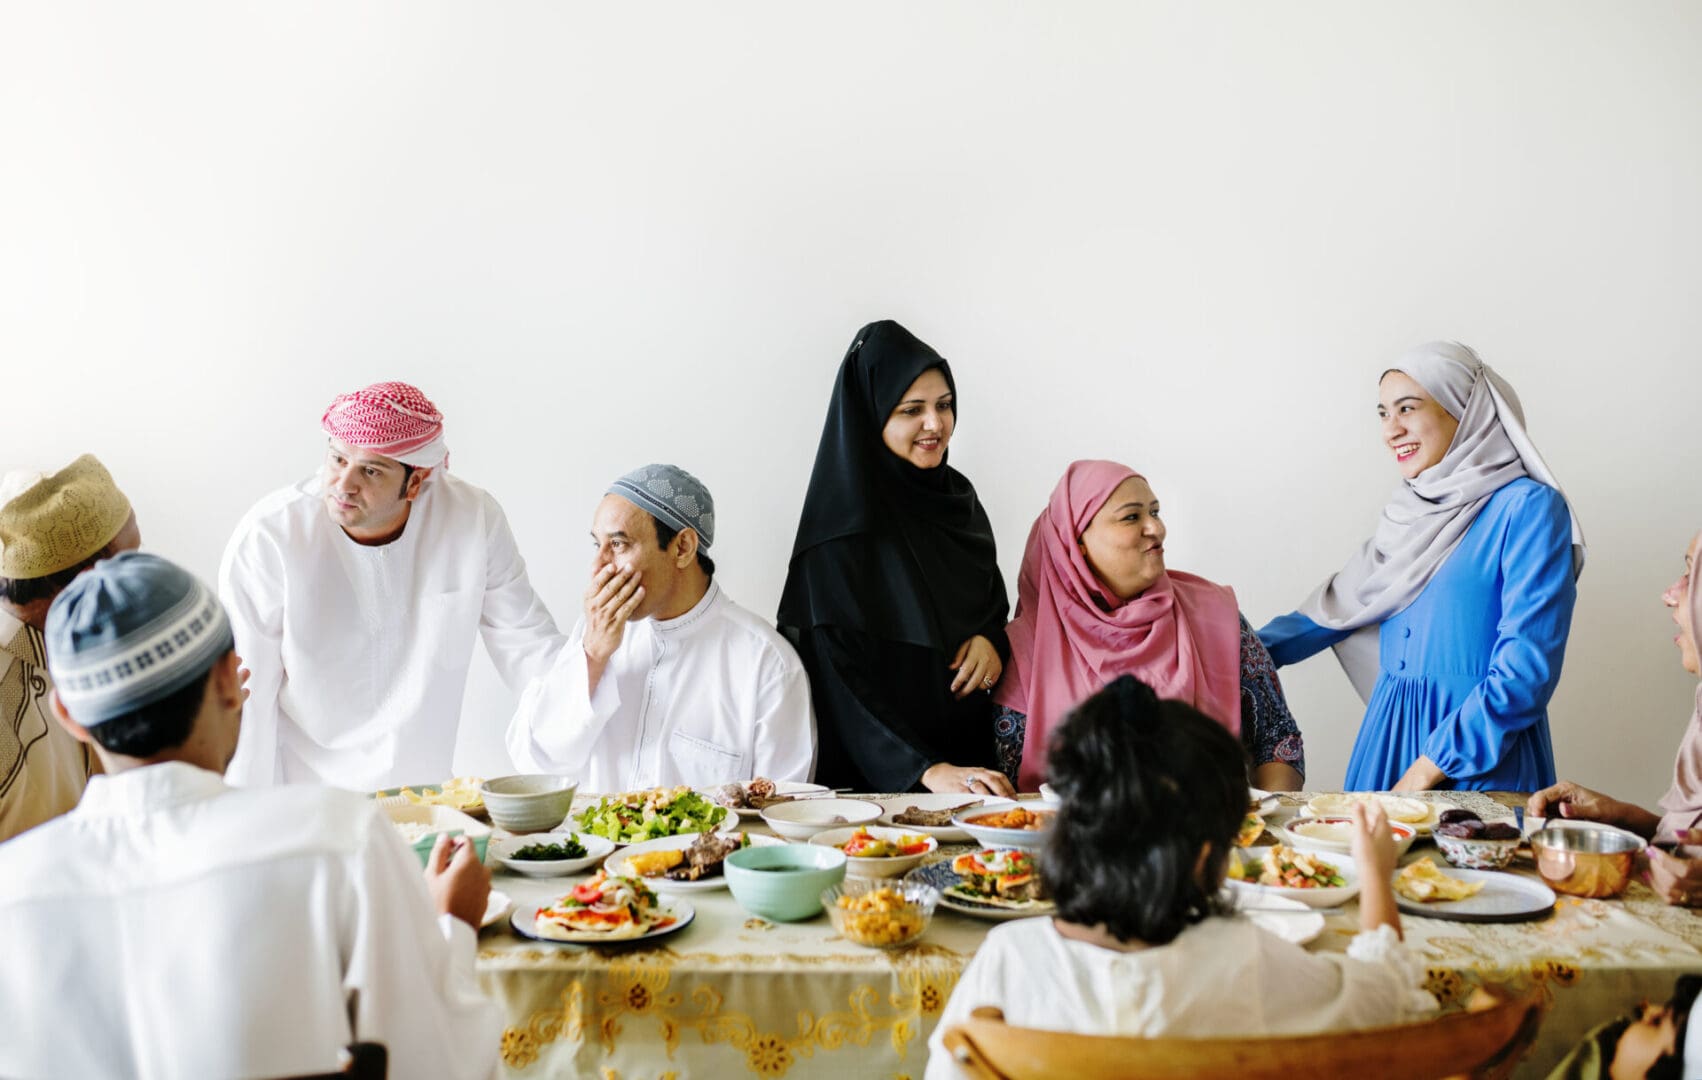 A family gathering for Eid Al-Fitr with members dressed in traditional Middle Eastern attire sharing a meal and conversation around a dining table.